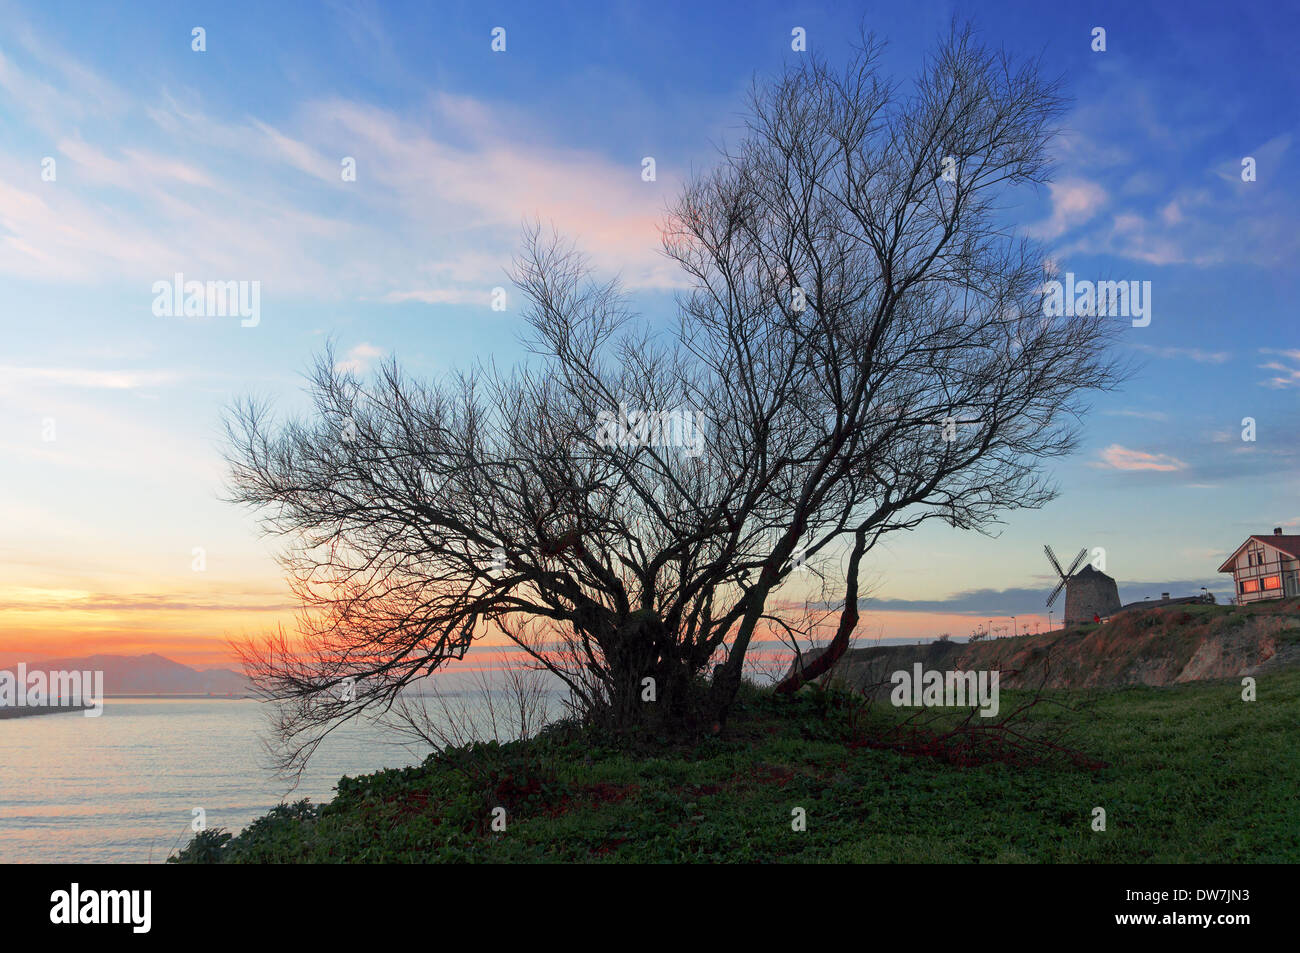 Getxo at sunset with tree silhouette and aixerrota mill Stock Photo